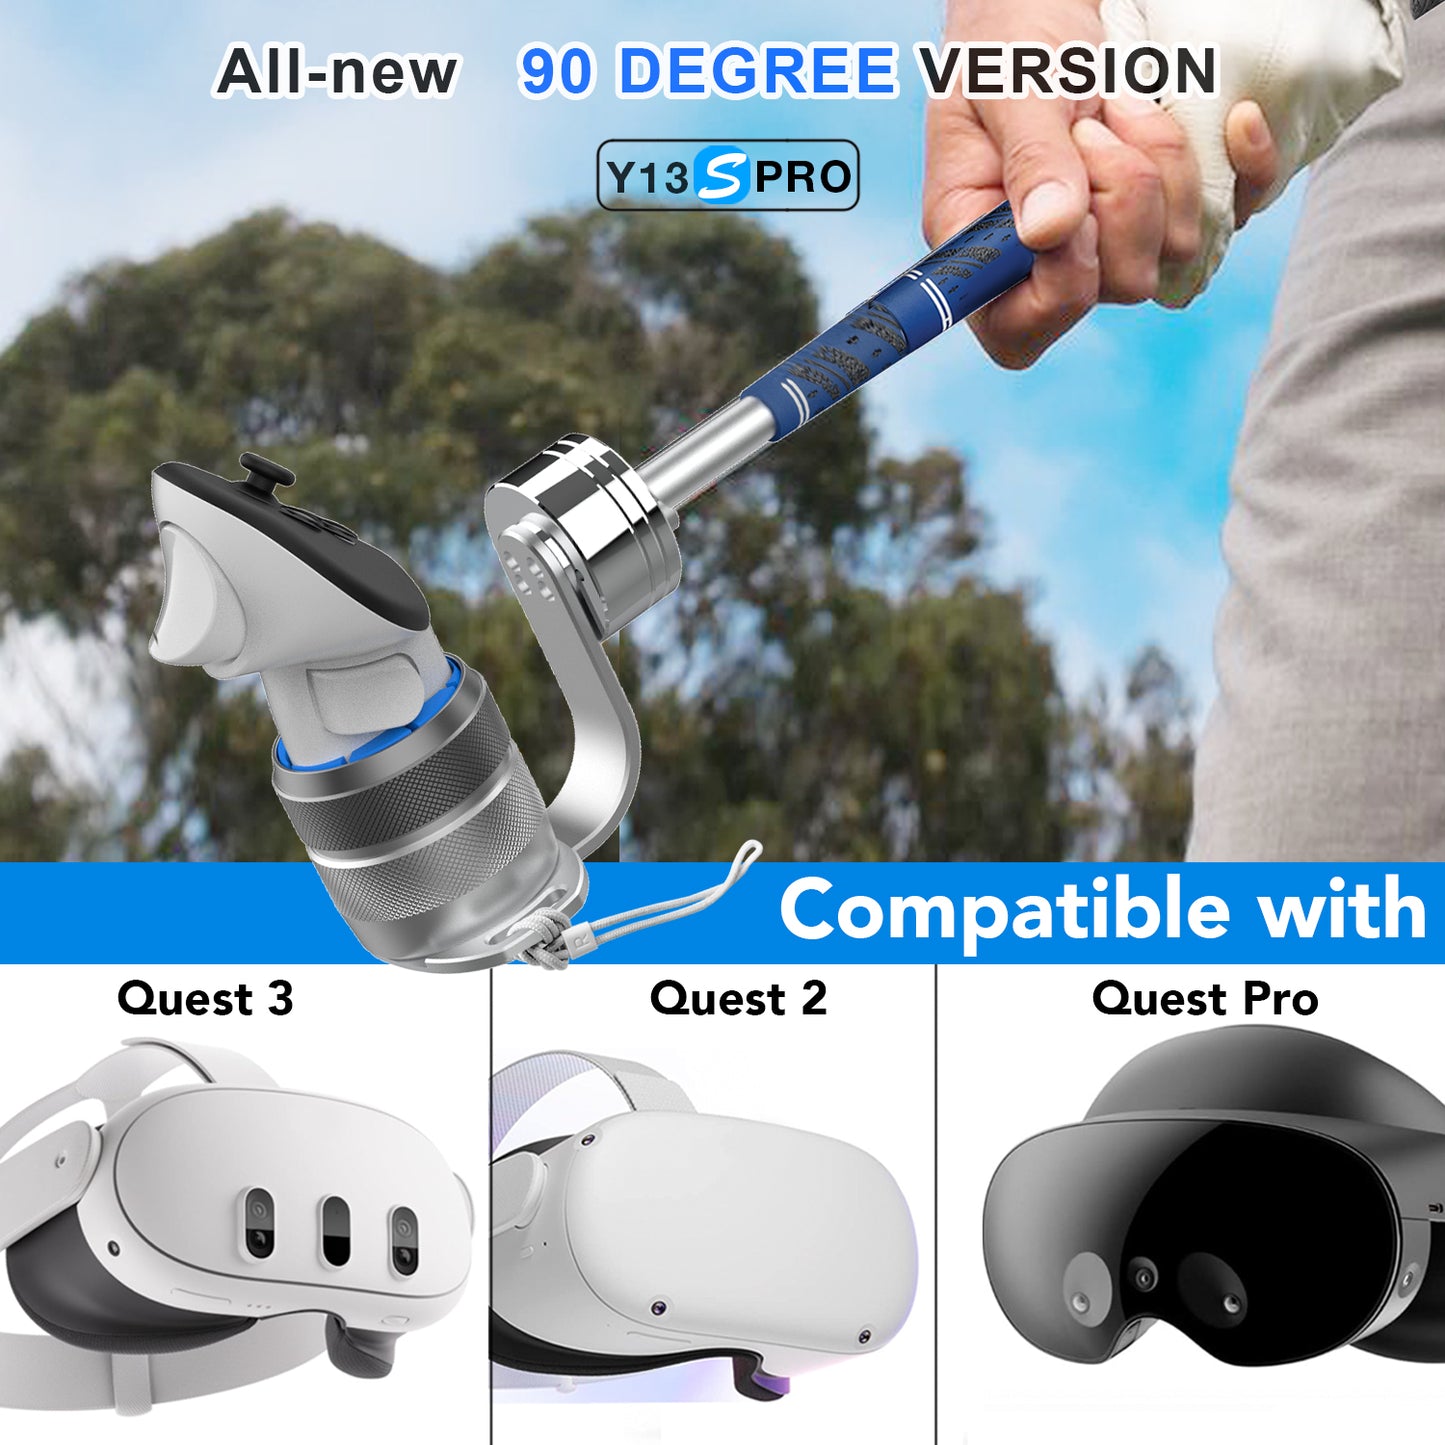 Weighted Golf Club Attachment for Meta Quest 3 | All new 90 DEGREE VERSION